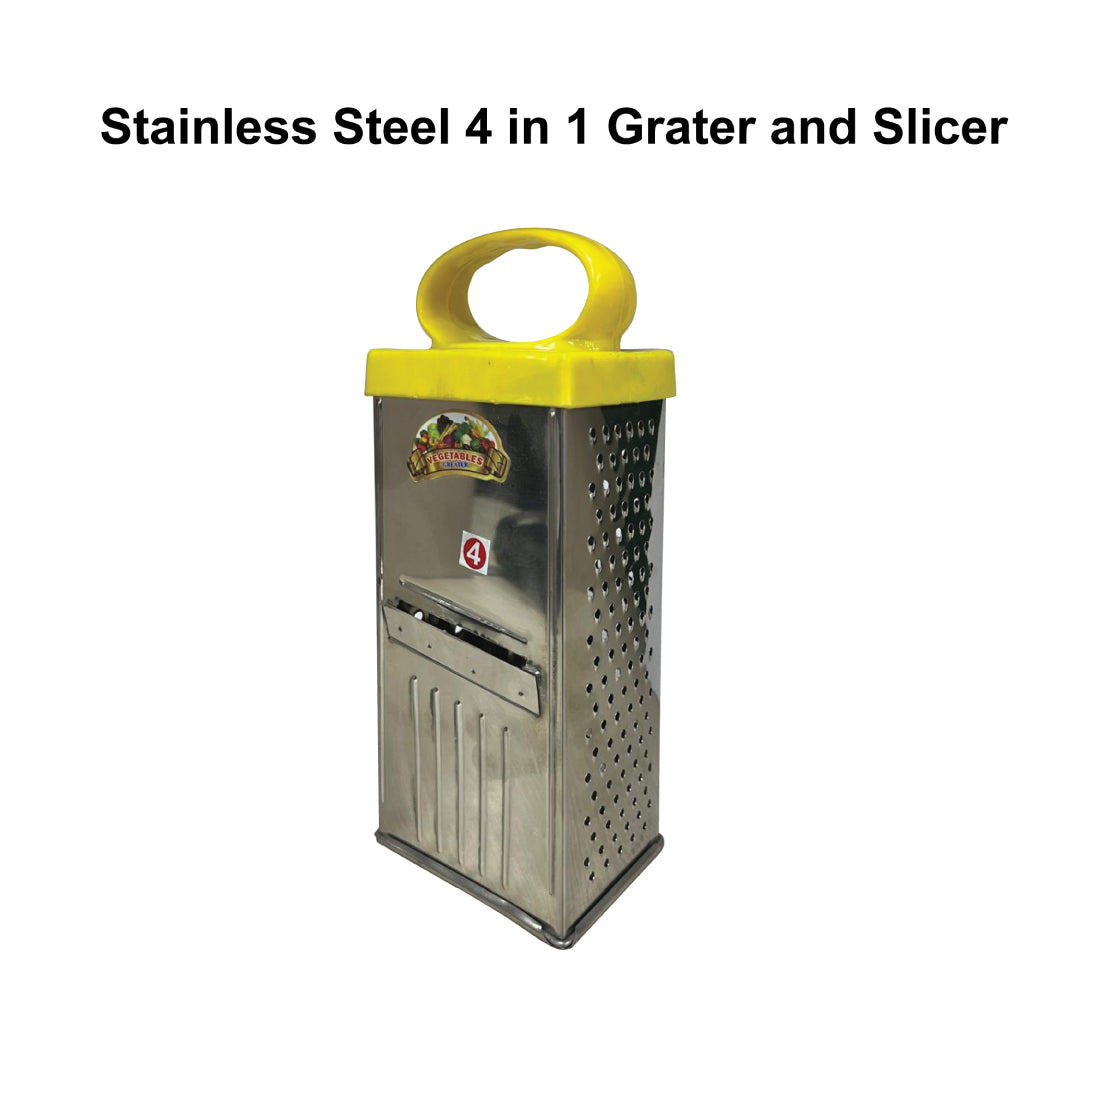 Stainless Steel 4 in 1 Grater and Slicer